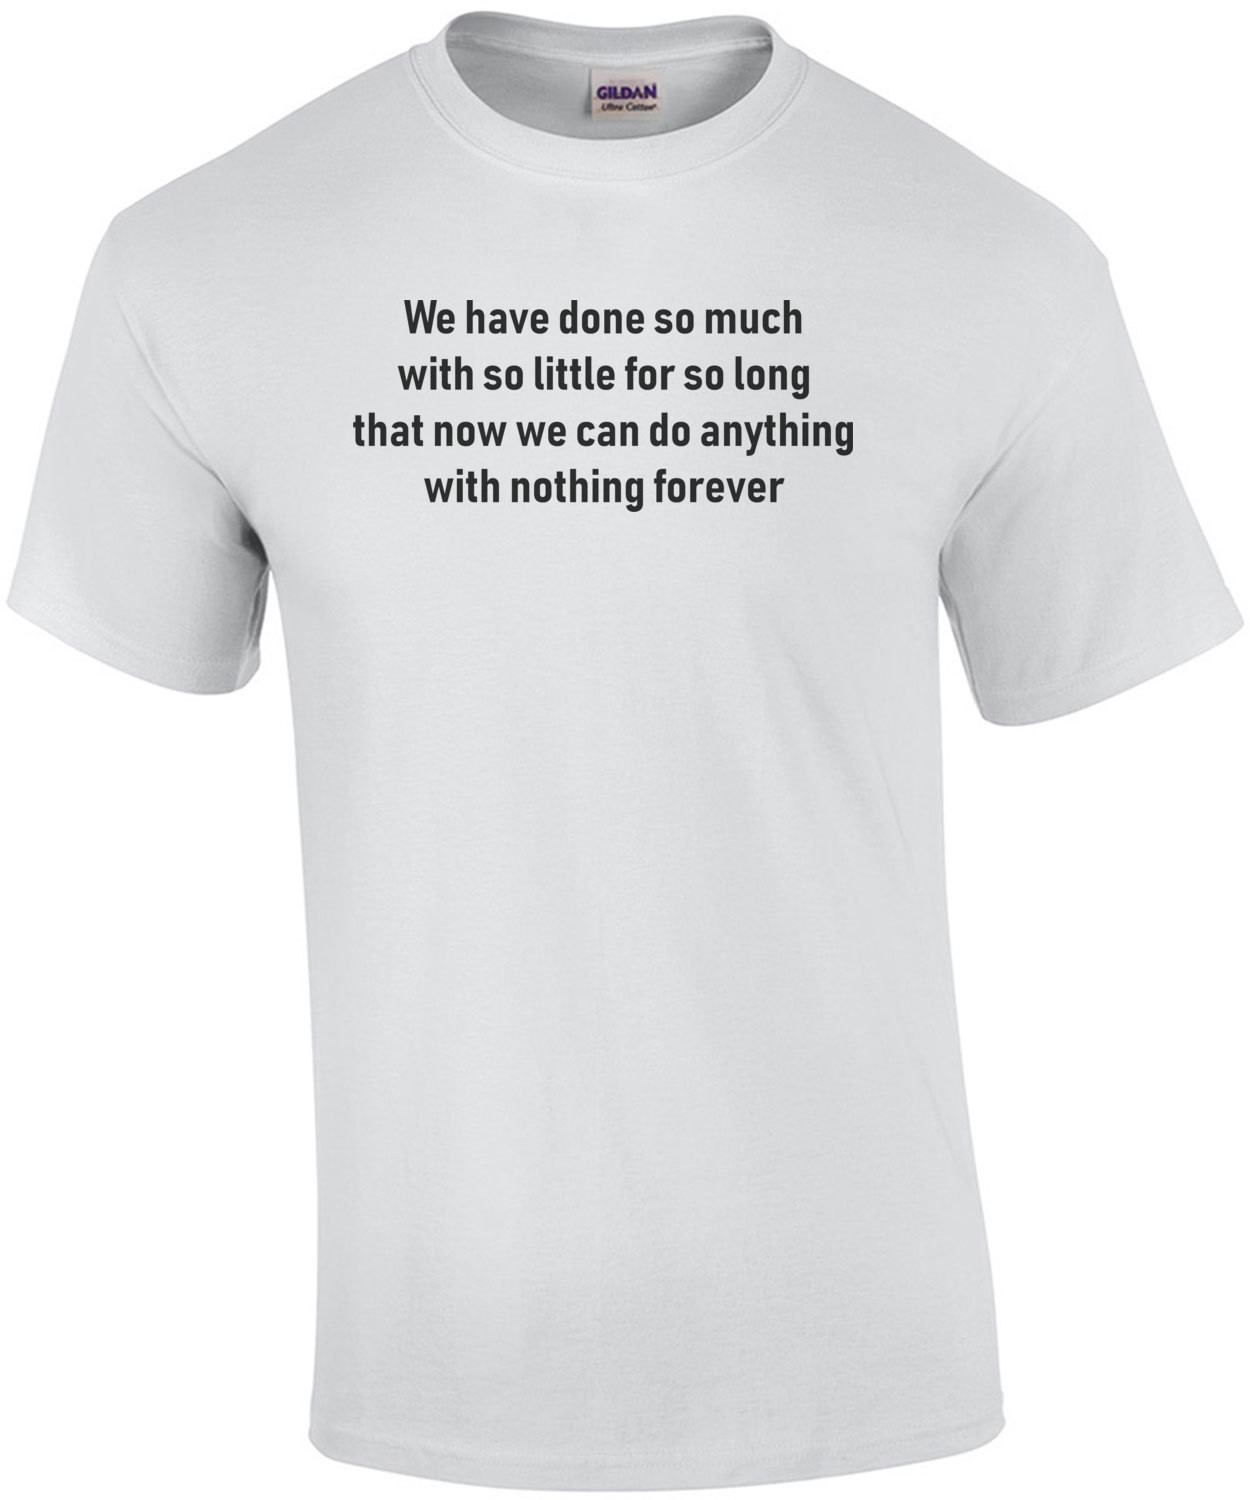 We have done so much with so little for so long that now we can do anything with nothing forever - inspirational t-shirt